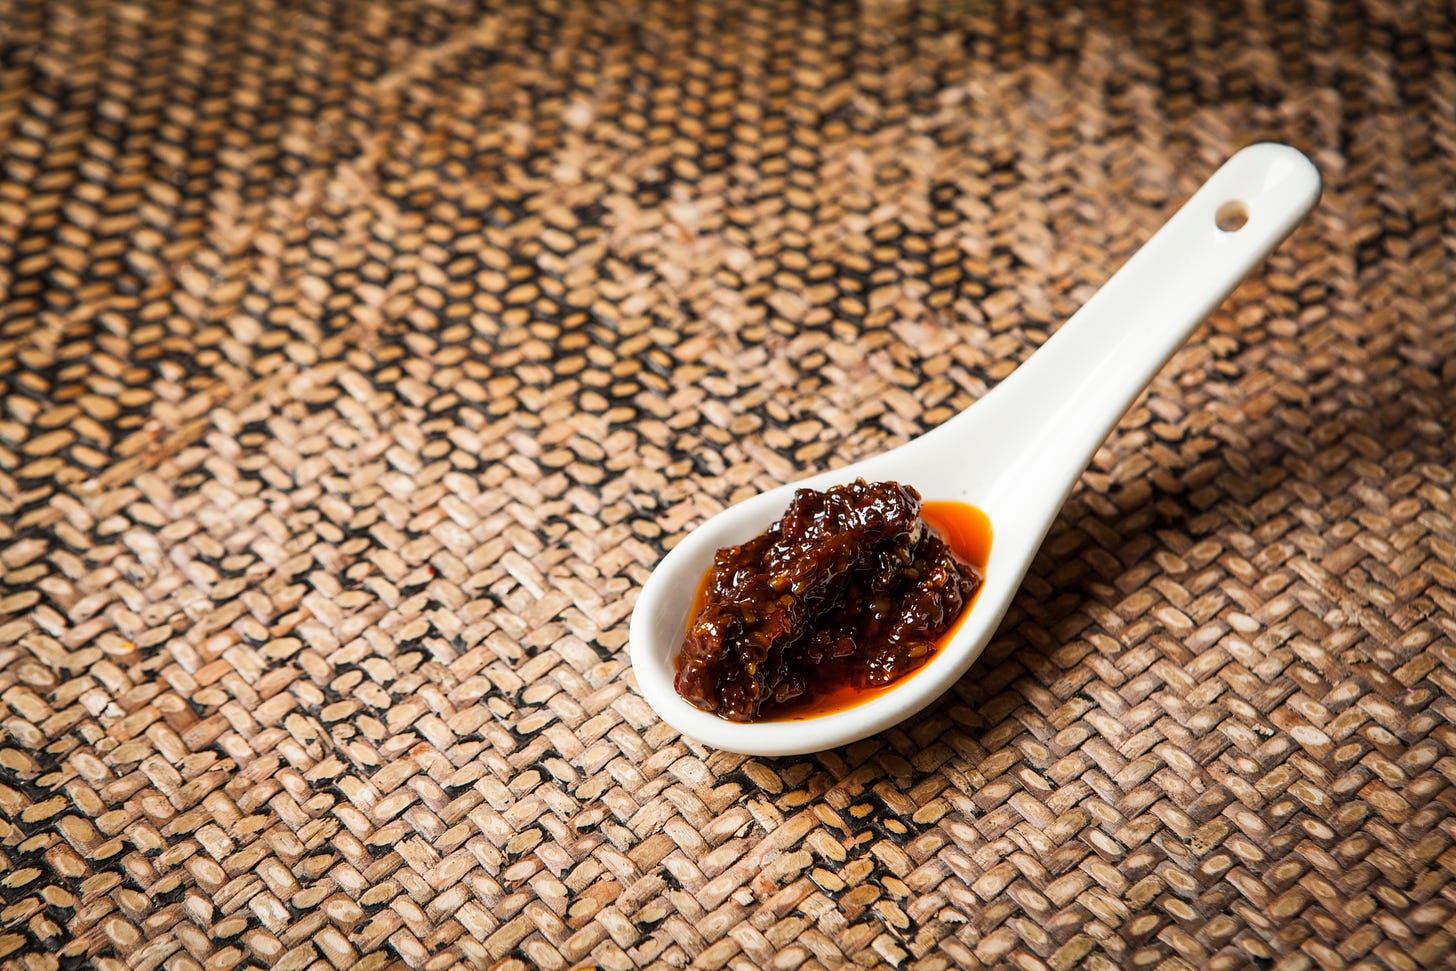 A white ceramic spoon rests on a rattan table mat. In the bowl of the spoon is a deep-reddish brown relish.